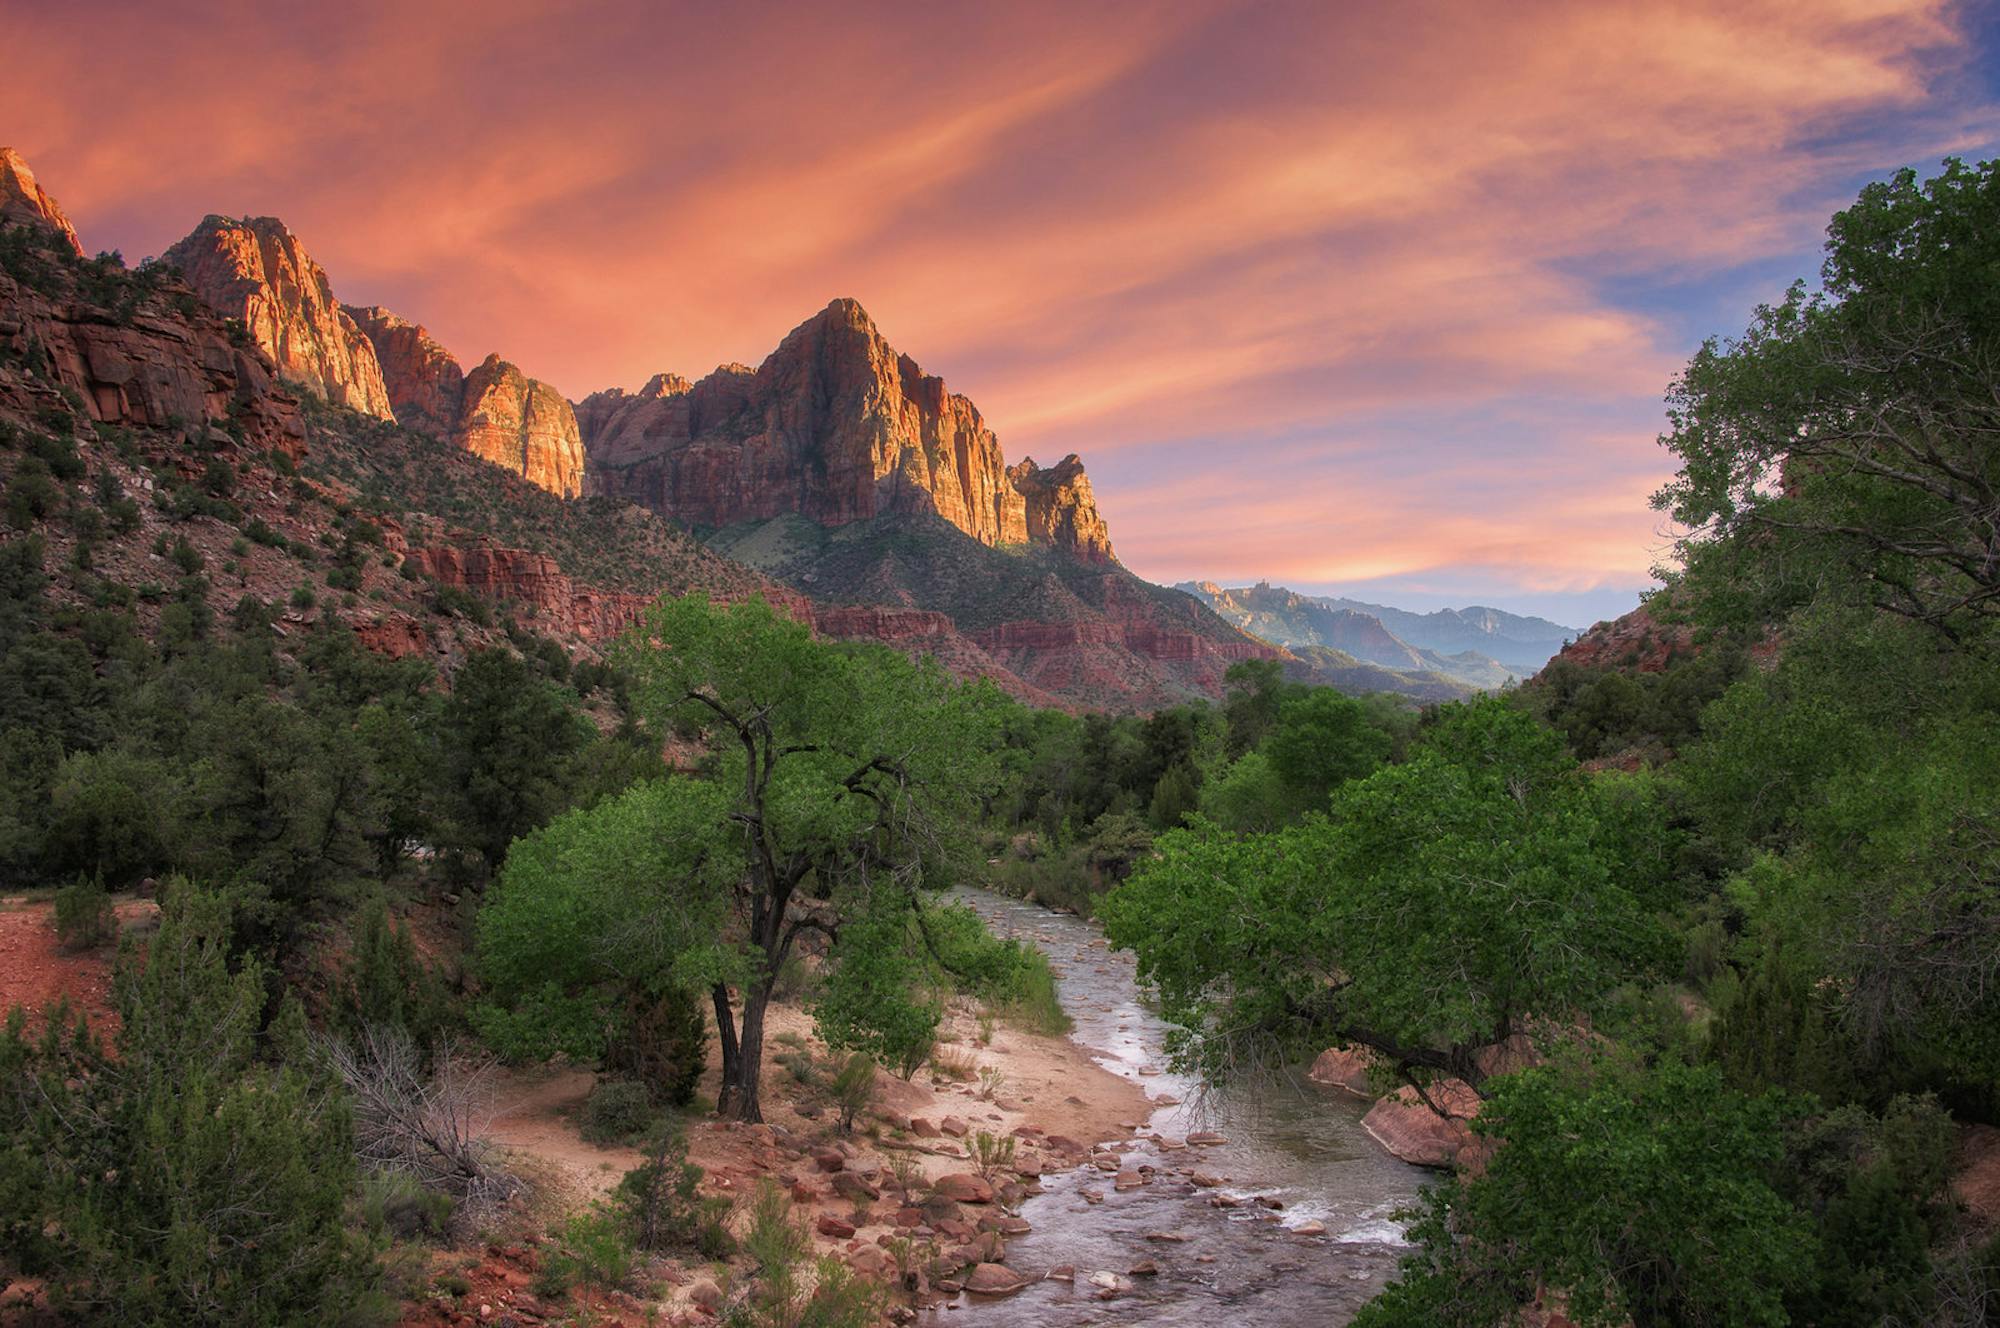 The Watchman, Zion National Park